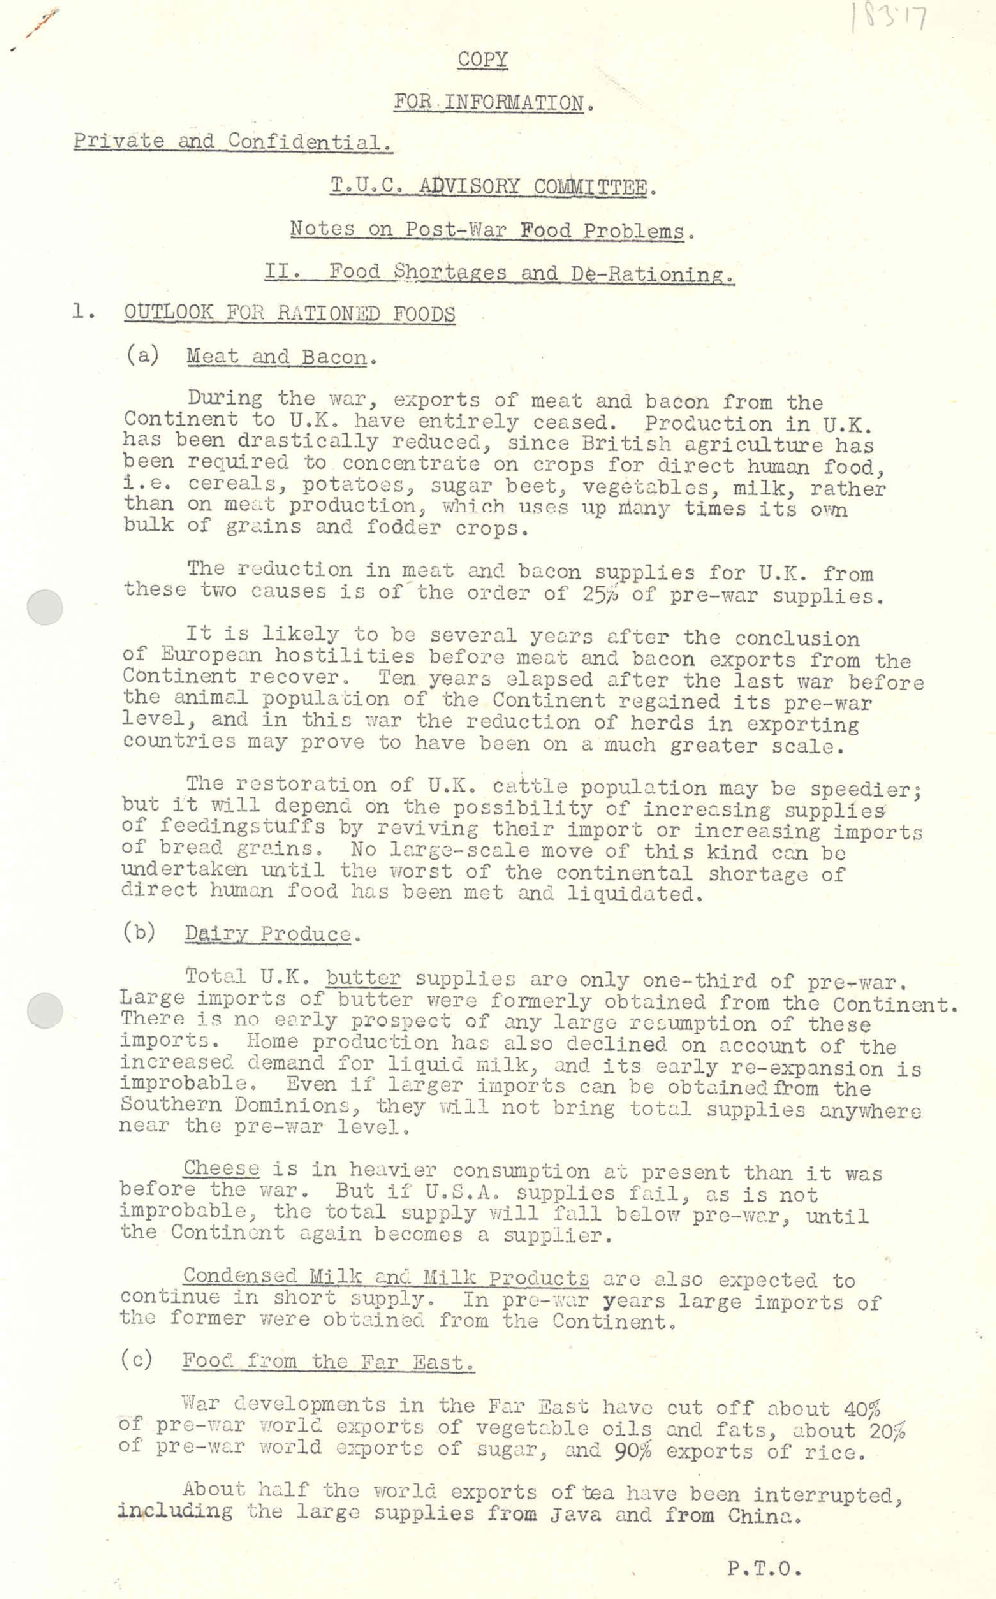 'Notes on Post-War Food Problems': 'III. Food Shortages and De-Rationing', 25 January 1944